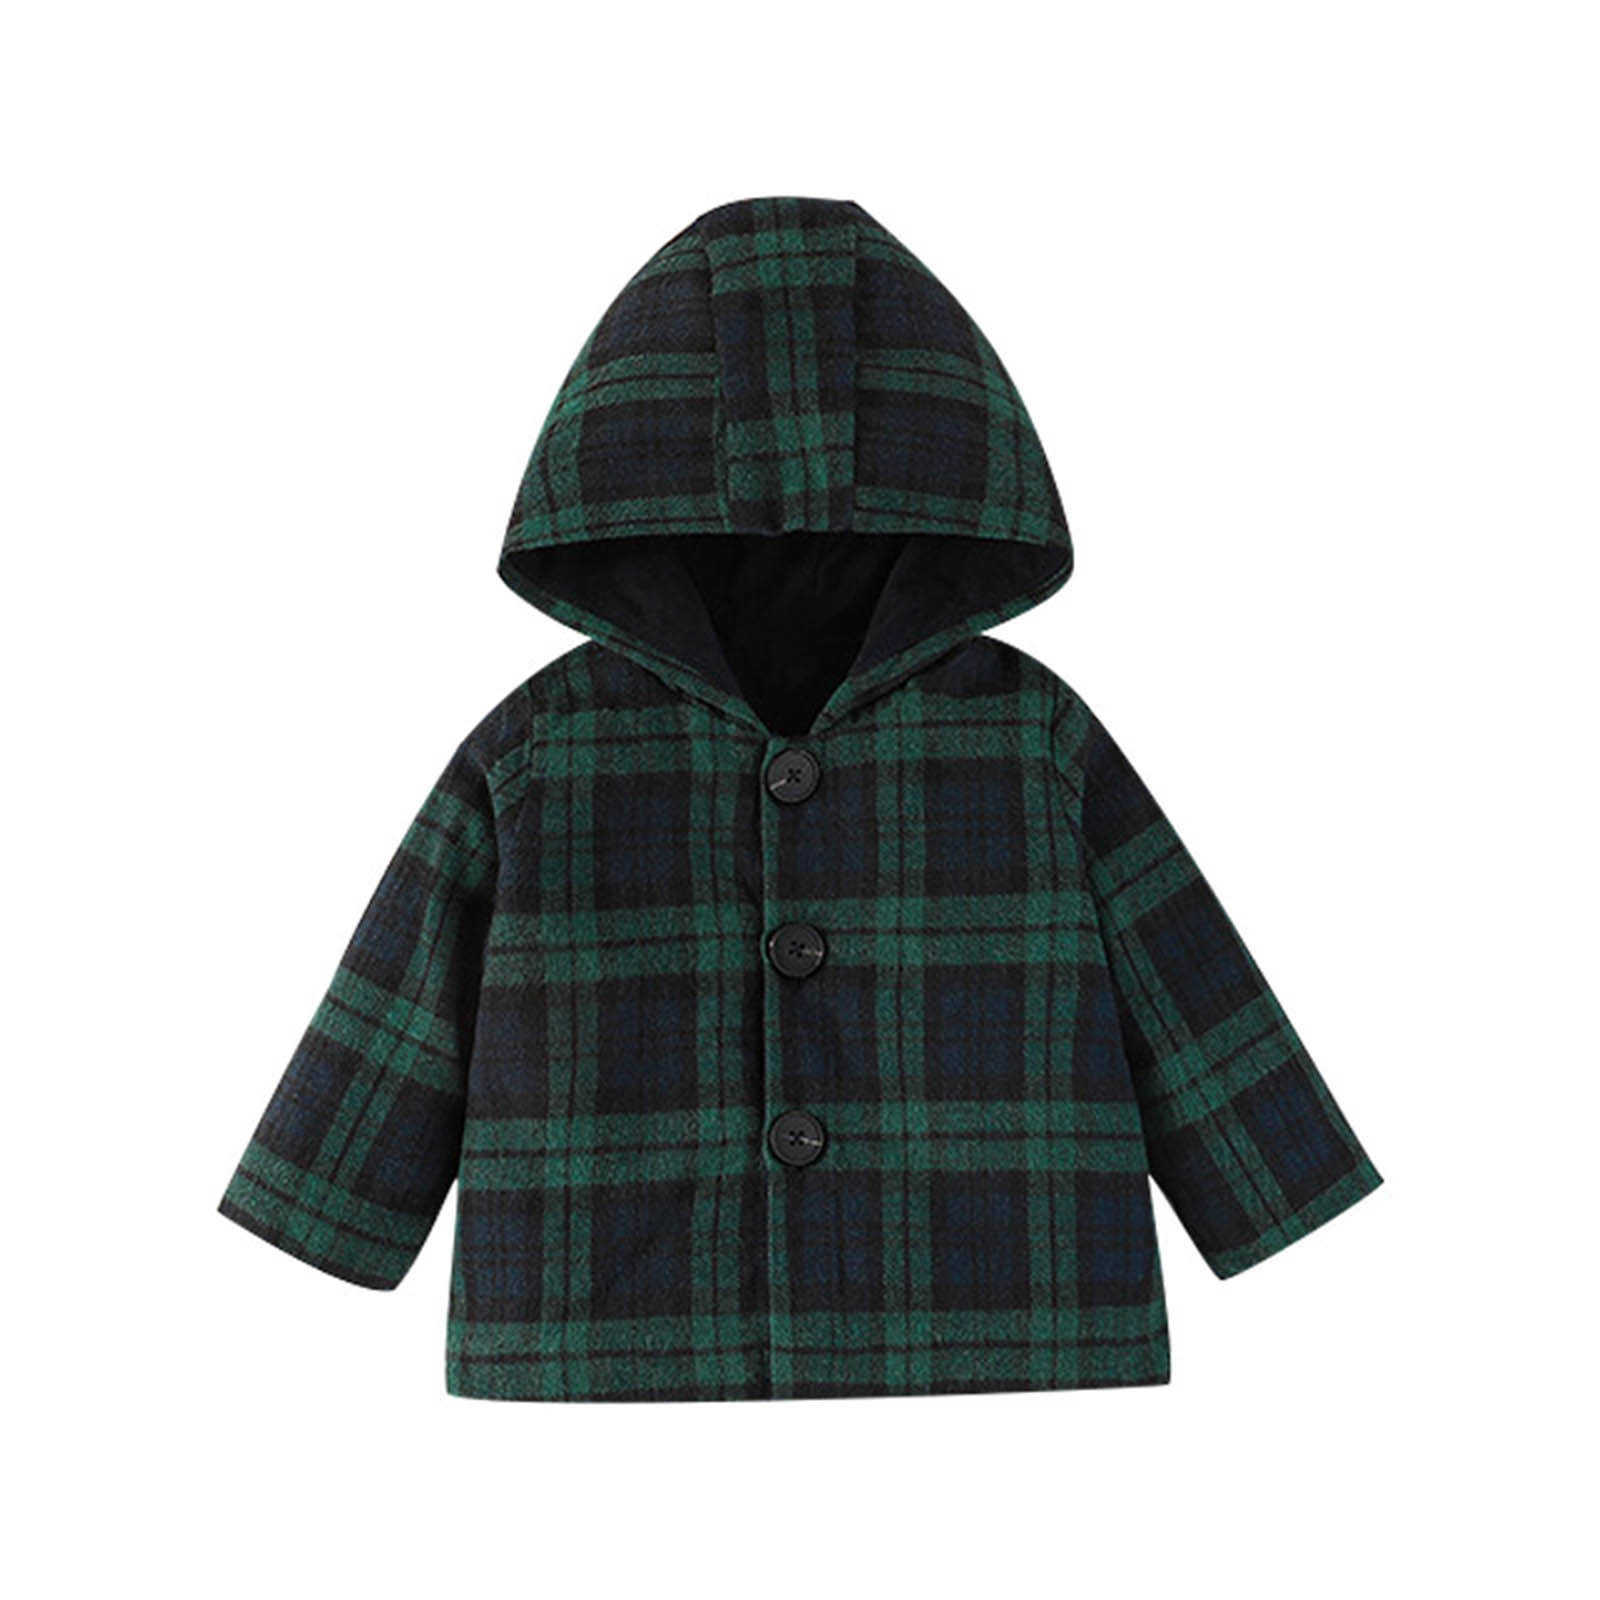 Toddler Fleece Lined Warm Shirt Jacket Autumn Winter Thick Fashion Plaid Long Sleeve Button Belt Hooded Jacket Girls' Casual Hoodie Wool Trench Coat - image 1 of 8